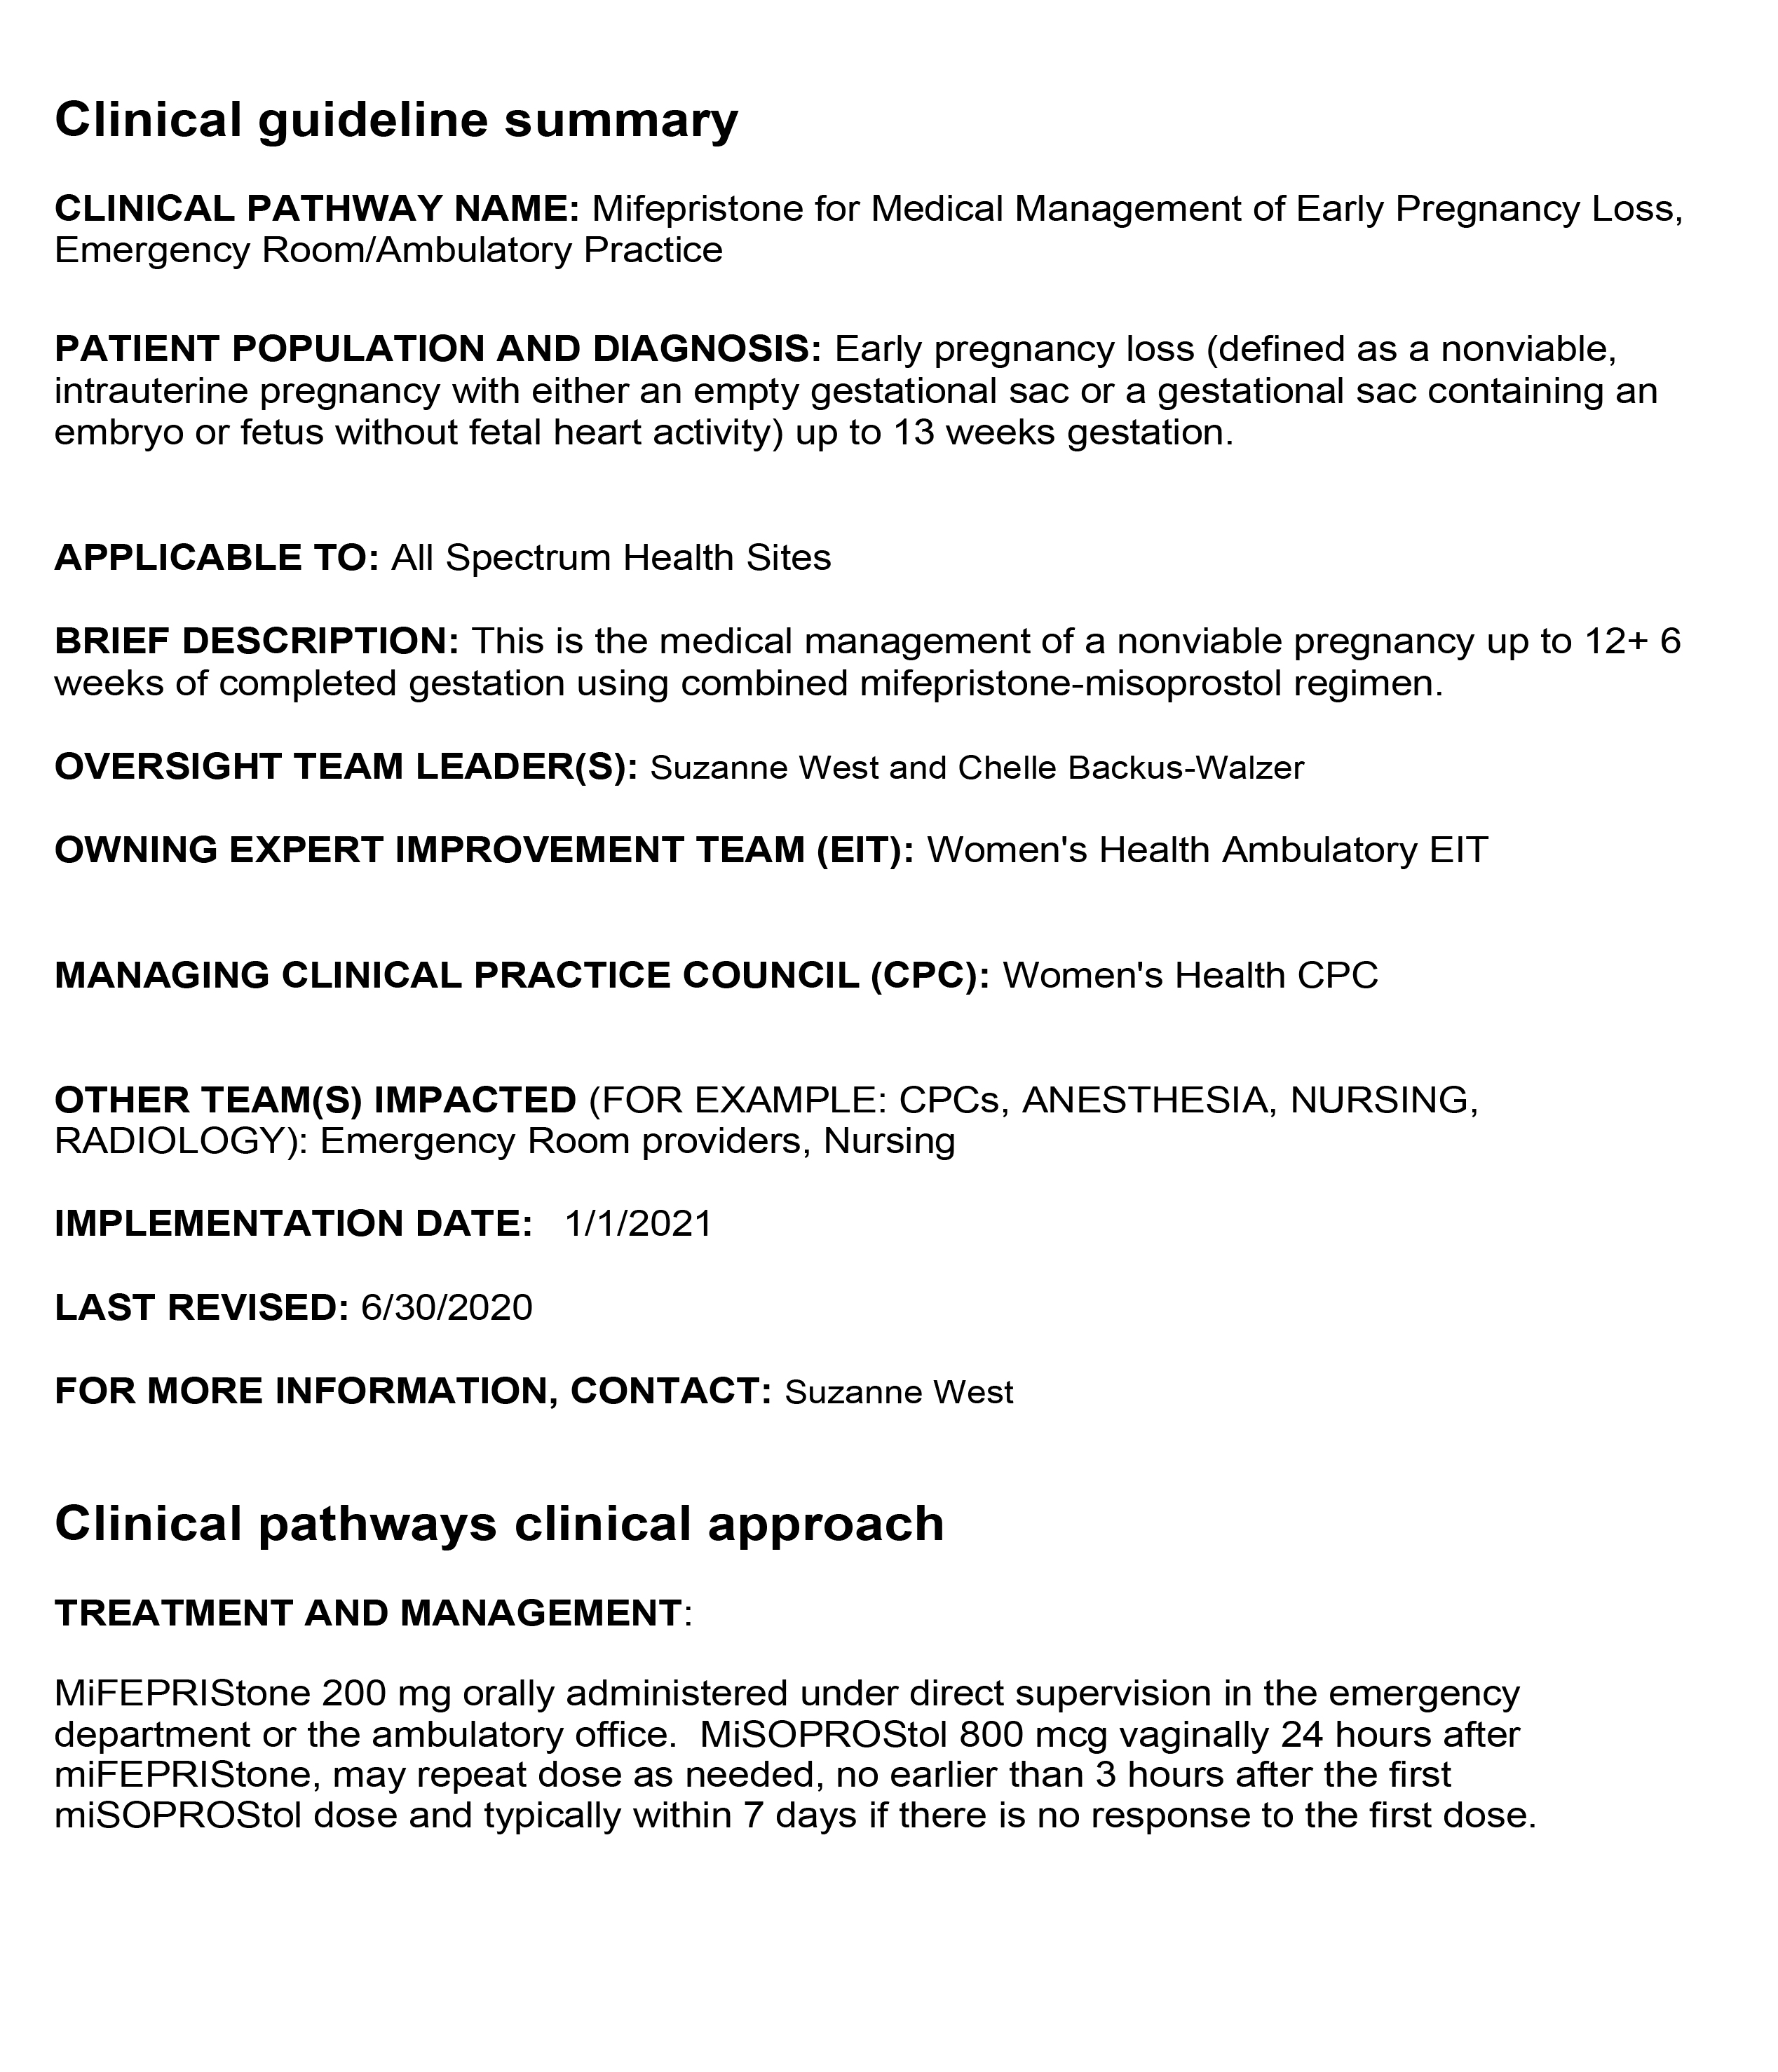 Clinical Guidelines Document Image 2